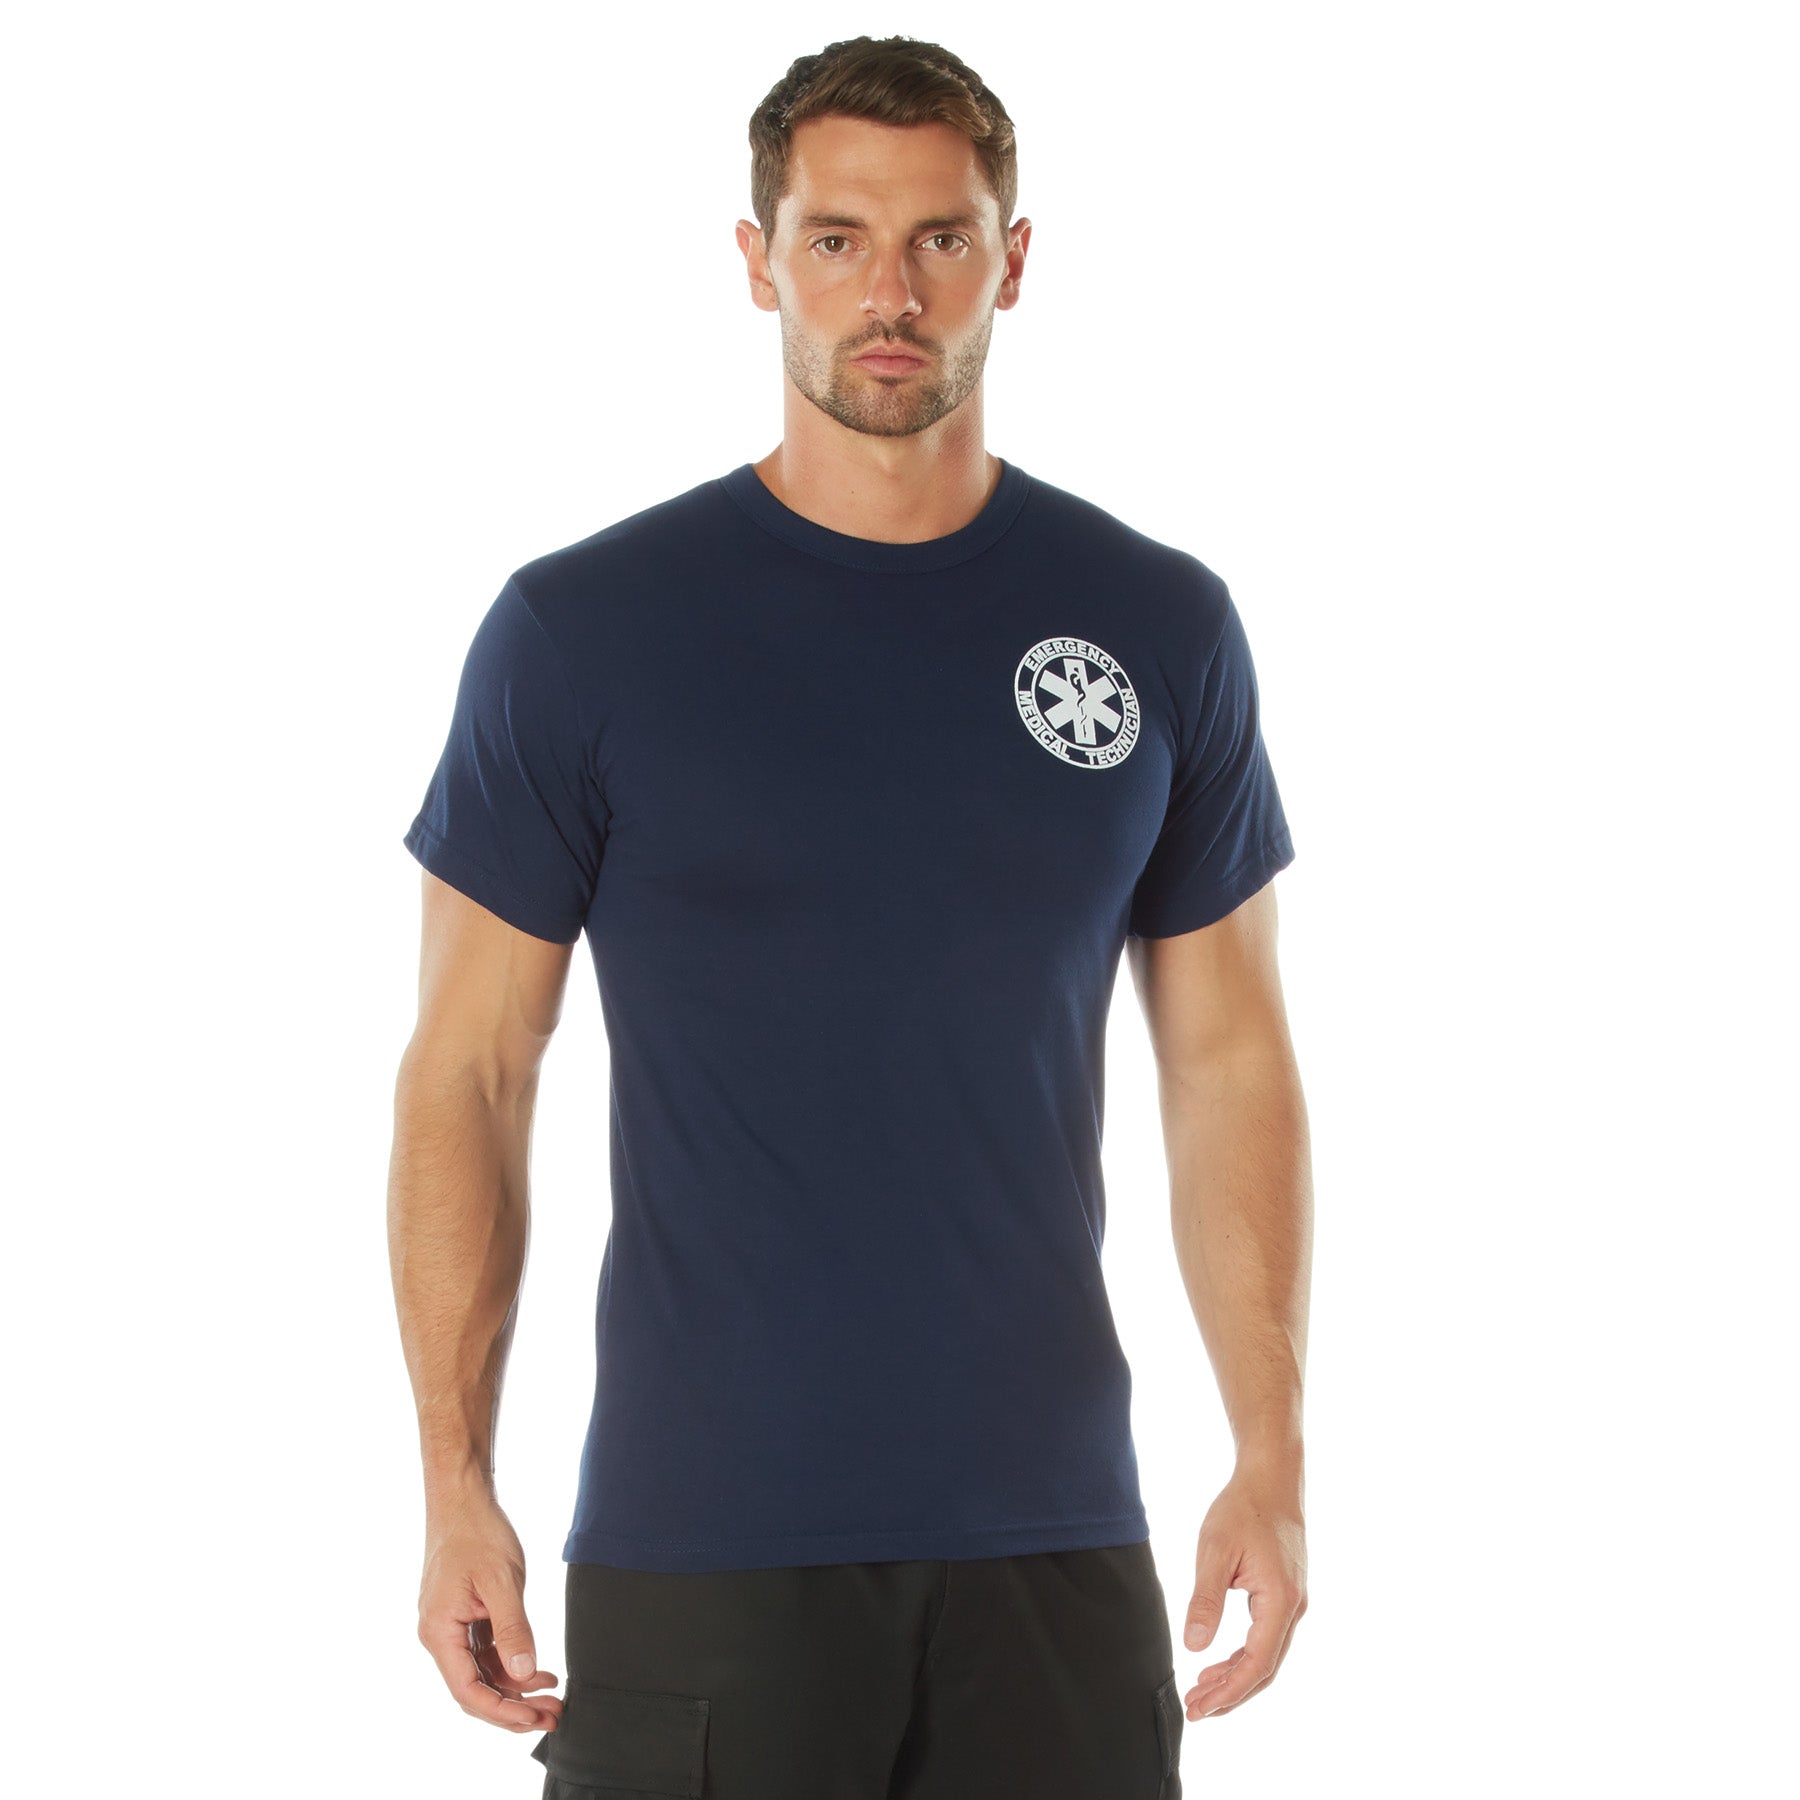 [Public Safety] Poly/Cotton 2-Sided EMT T-Shirts EMT White - Navy Blue